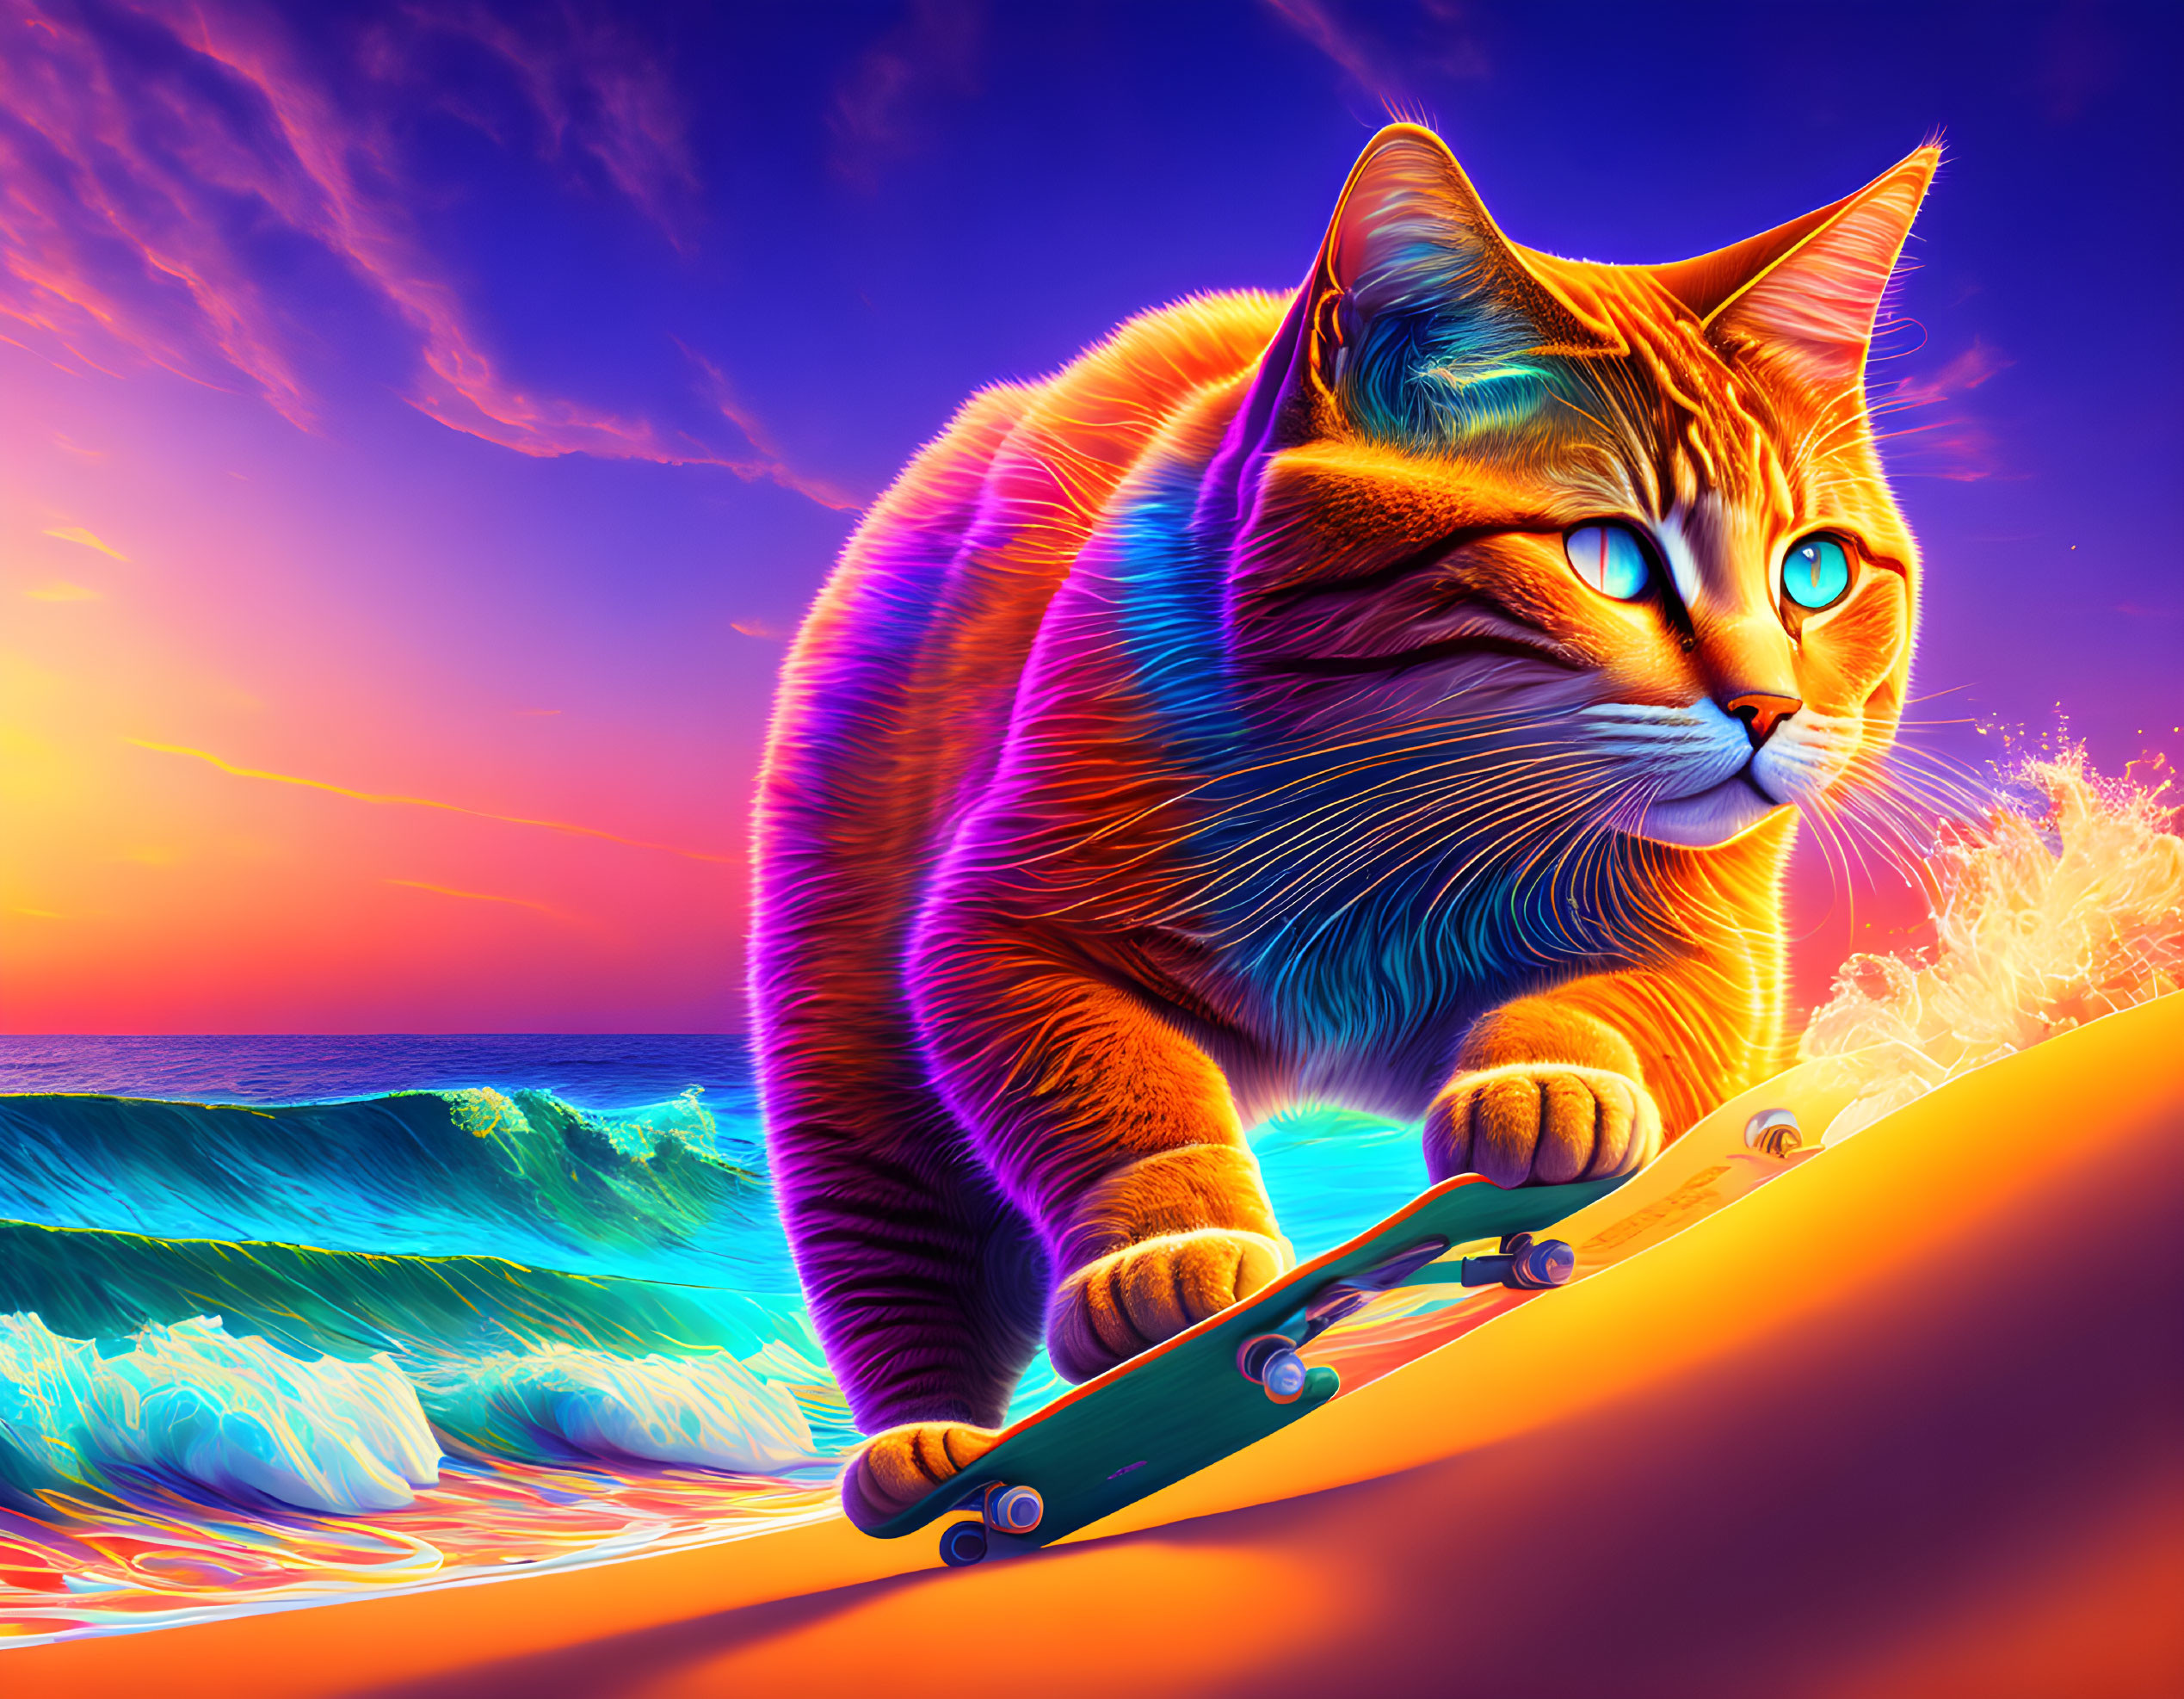 Colorful Cat Skateboarding by Sunset Sea